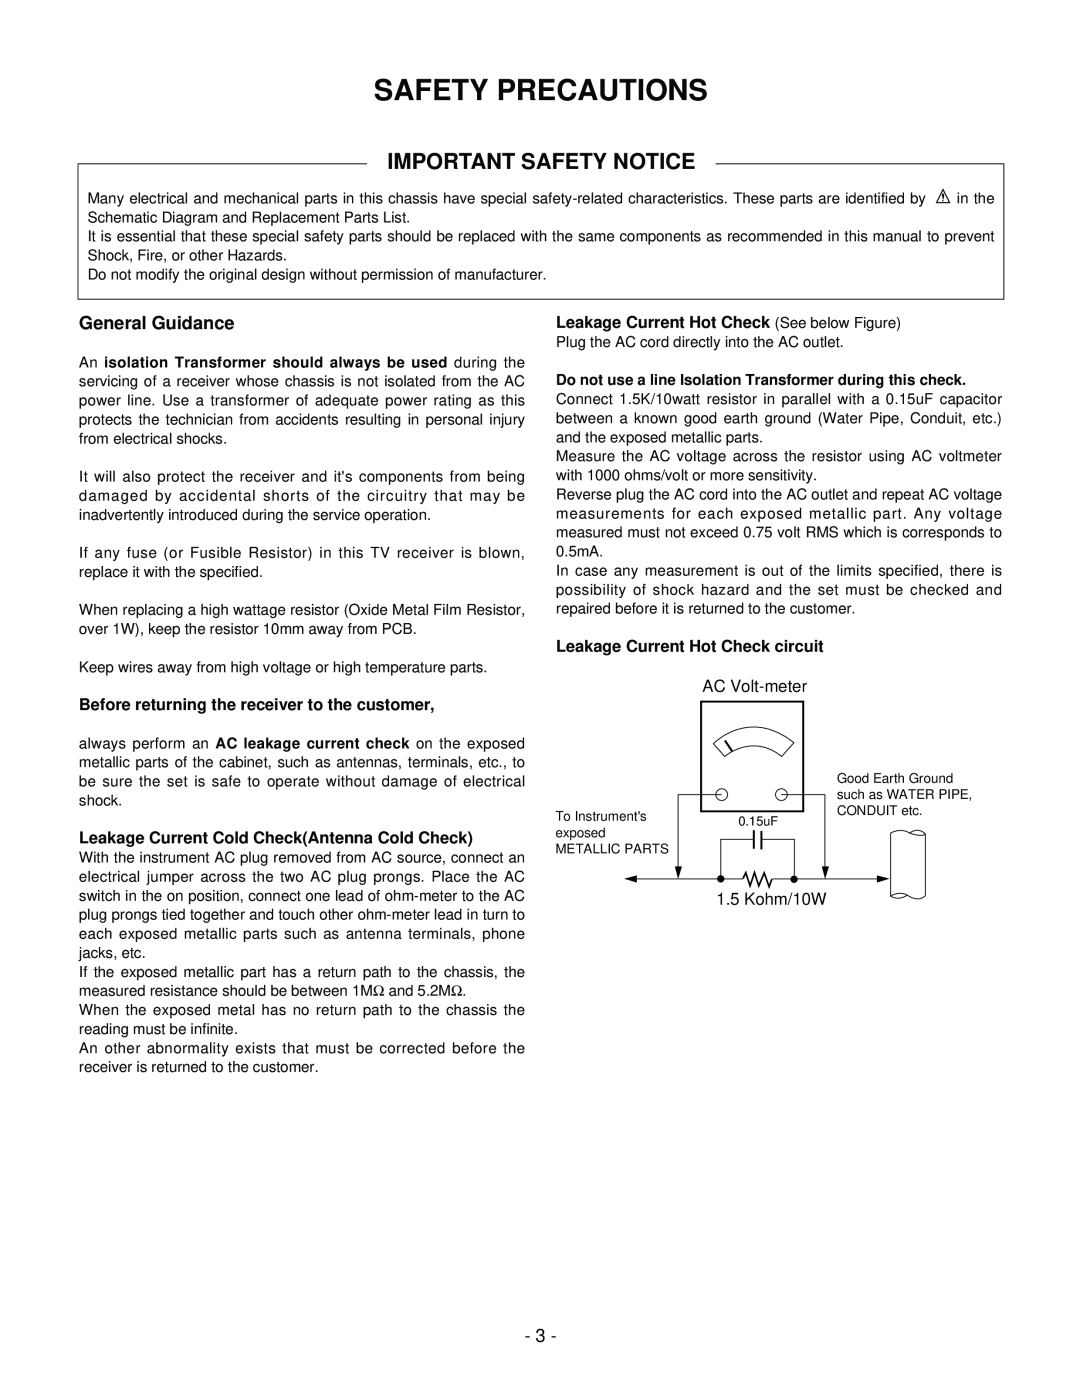 LG Electronics 32LC2D(B) Safety Precautions, Important Safety Notice, General Guidance, Leakage Current Hot Check circuit 